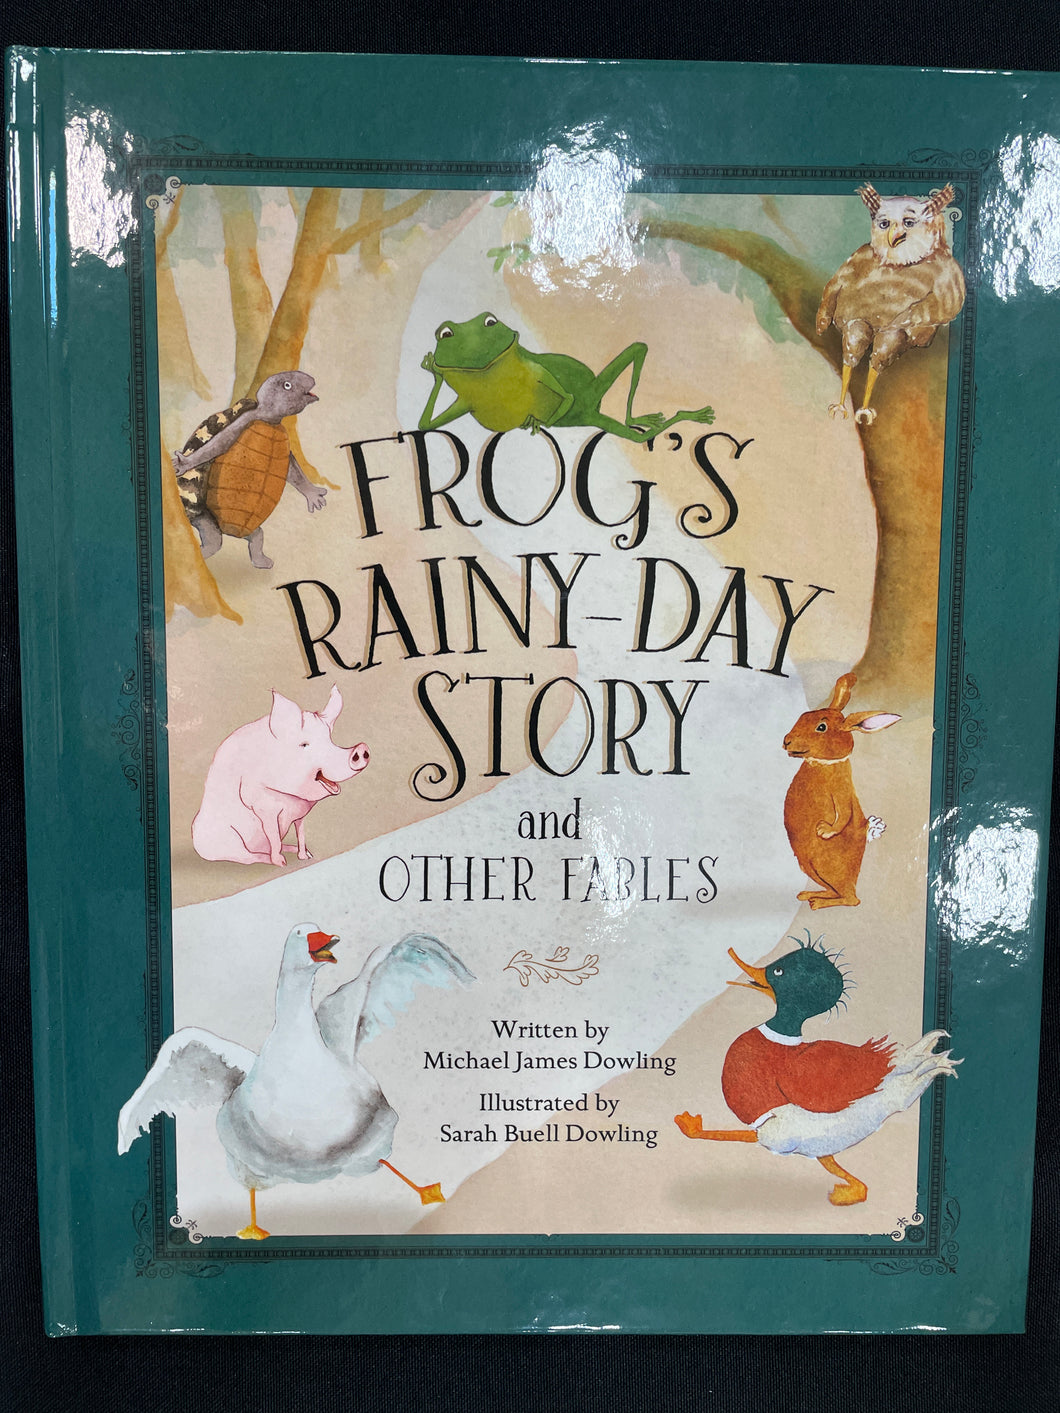 Frogs Rainy-Day Story